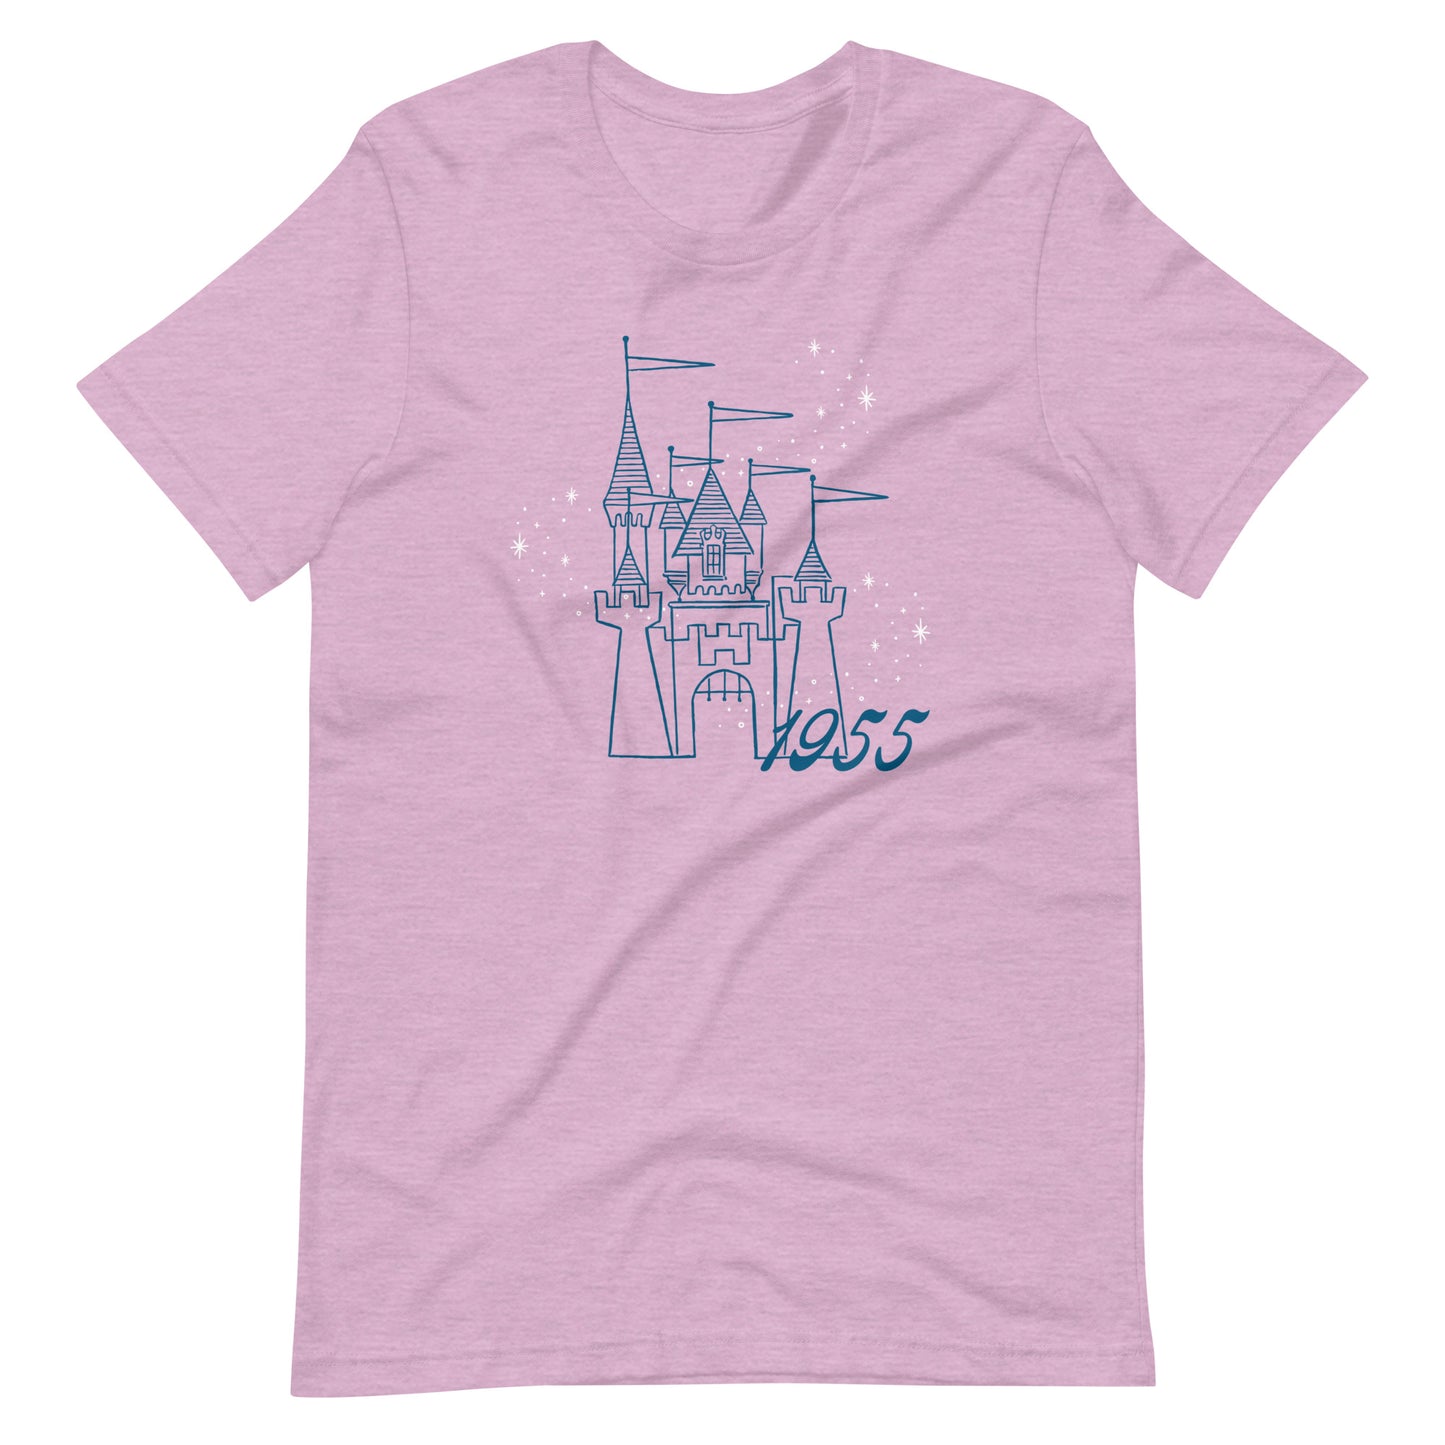 Purple t-shirt printed with vintage style sketch of the Disneyland Castle with the year 1955 and pixie dust above the castle.